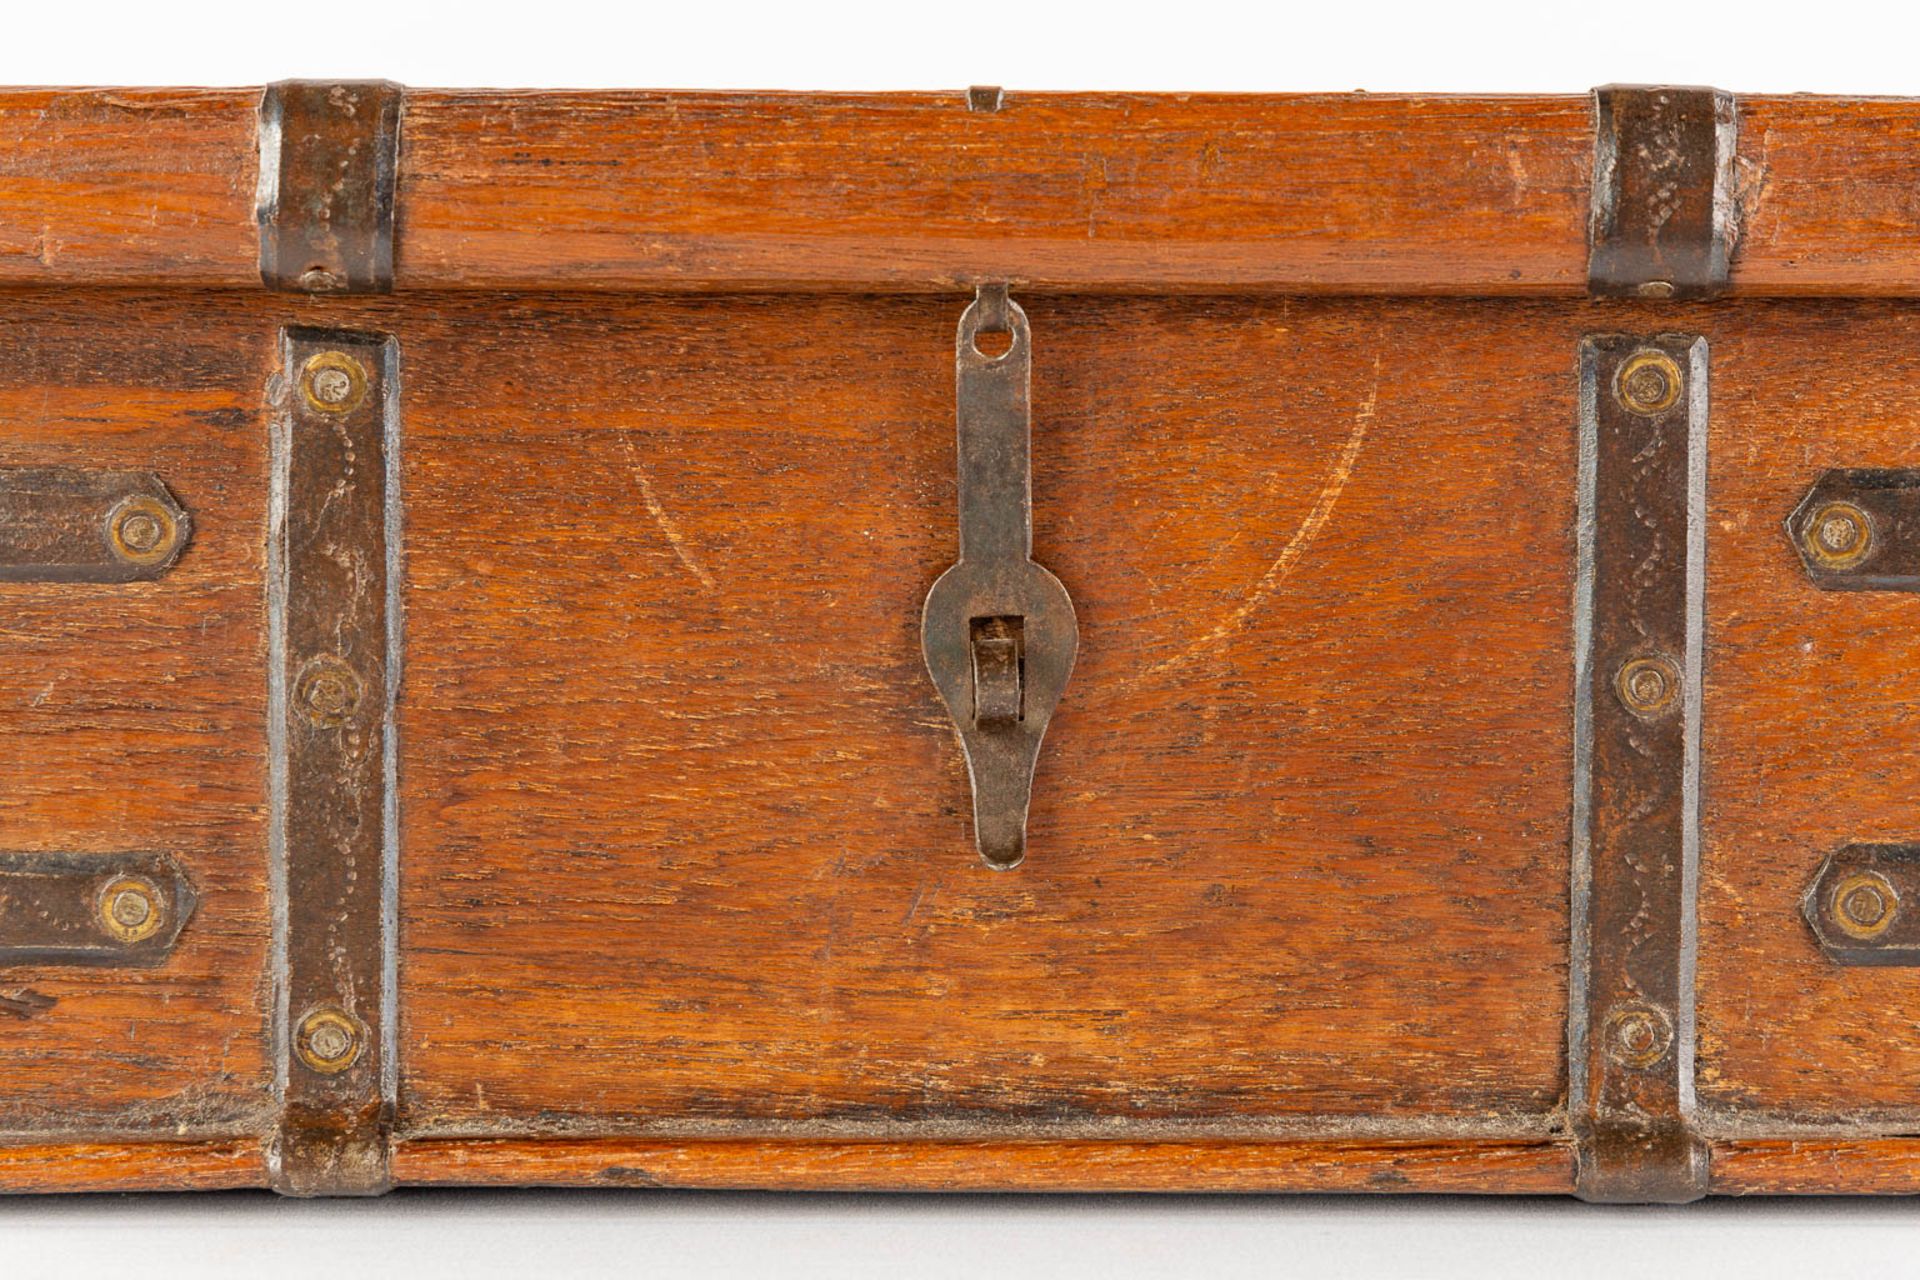 An antique money box or storage chest, oak and wrought iron, 19th C. (L:23 x W:31 x H:13 cm) - Image 11 of 13